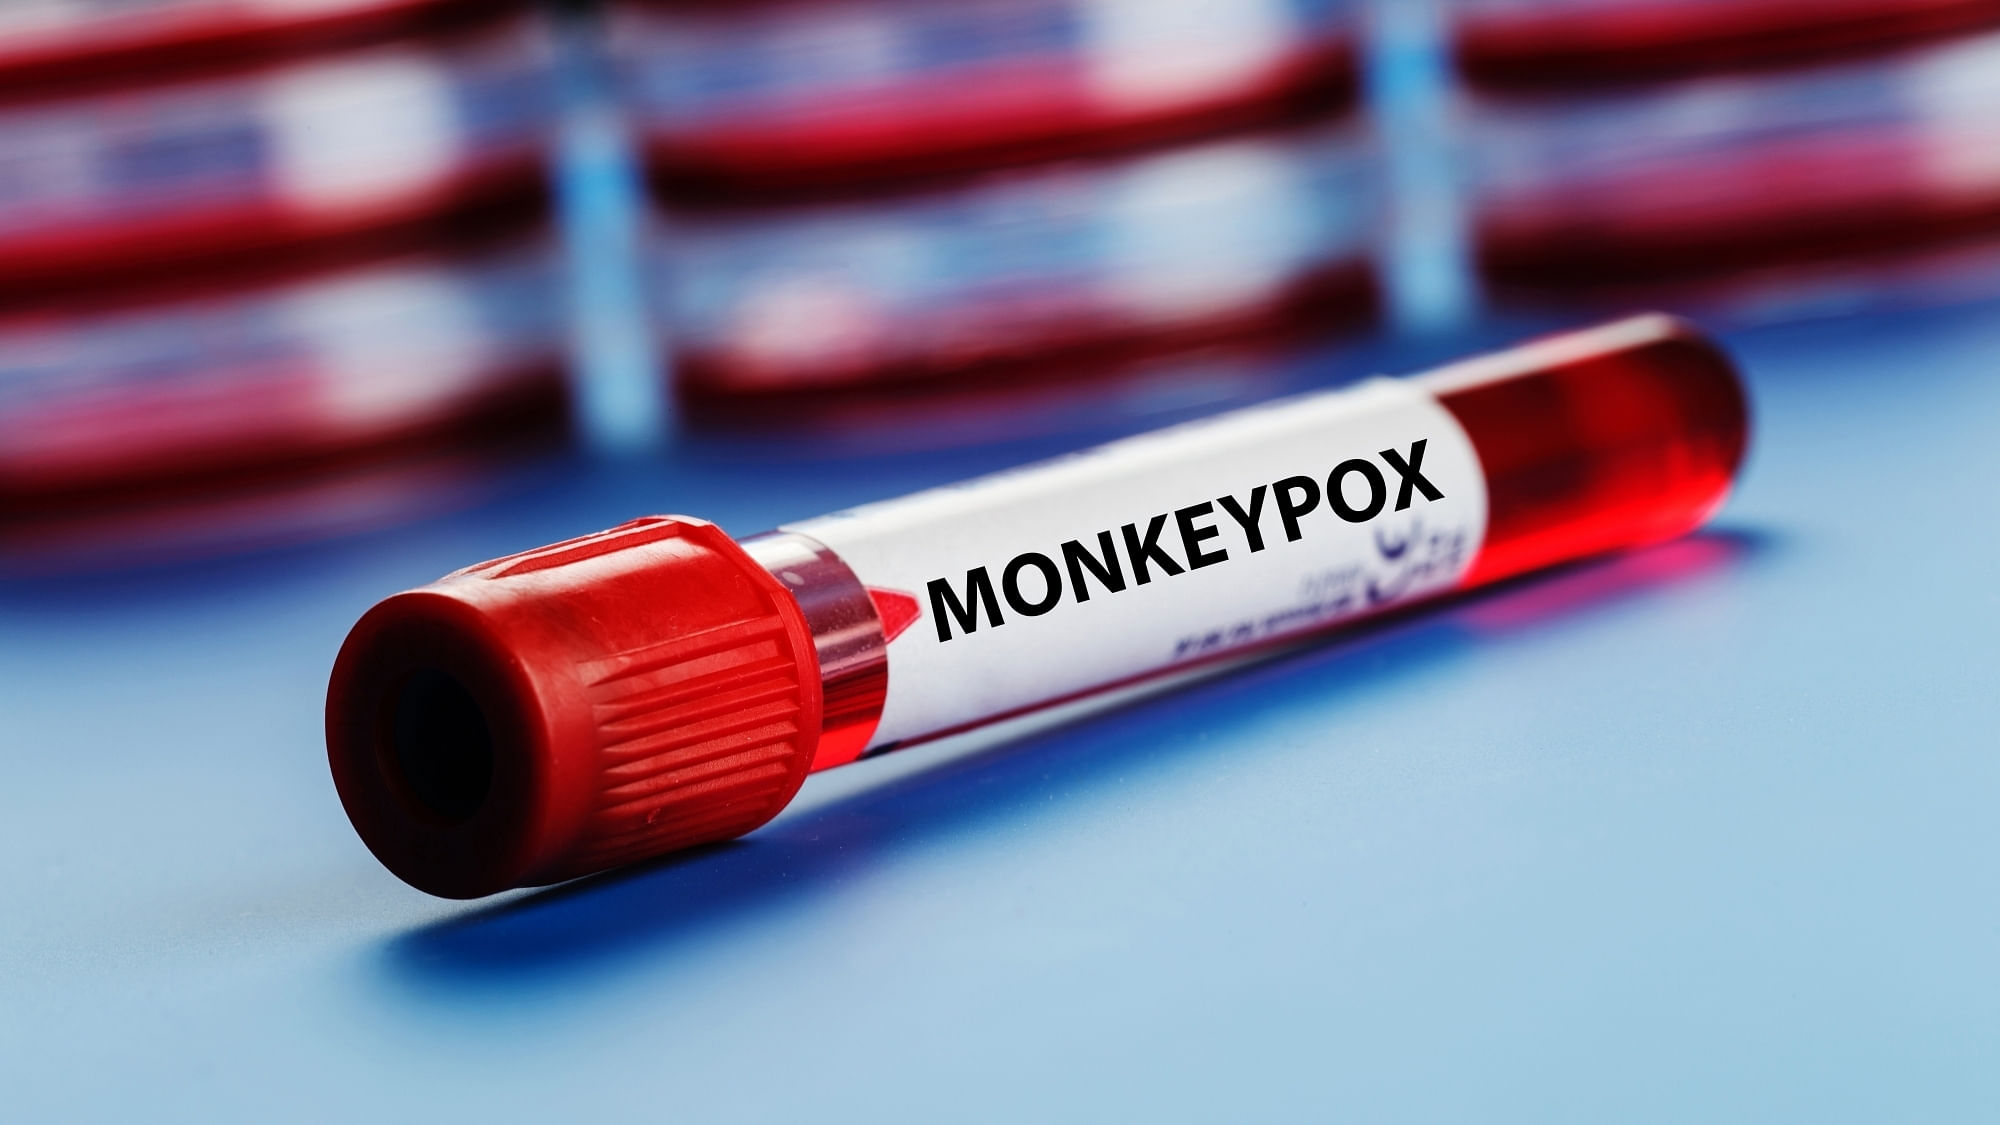 In Europe, in recent weeks there has been a slowing in the rate of increase in new monkeypox cases each week. Credit: IANS photo